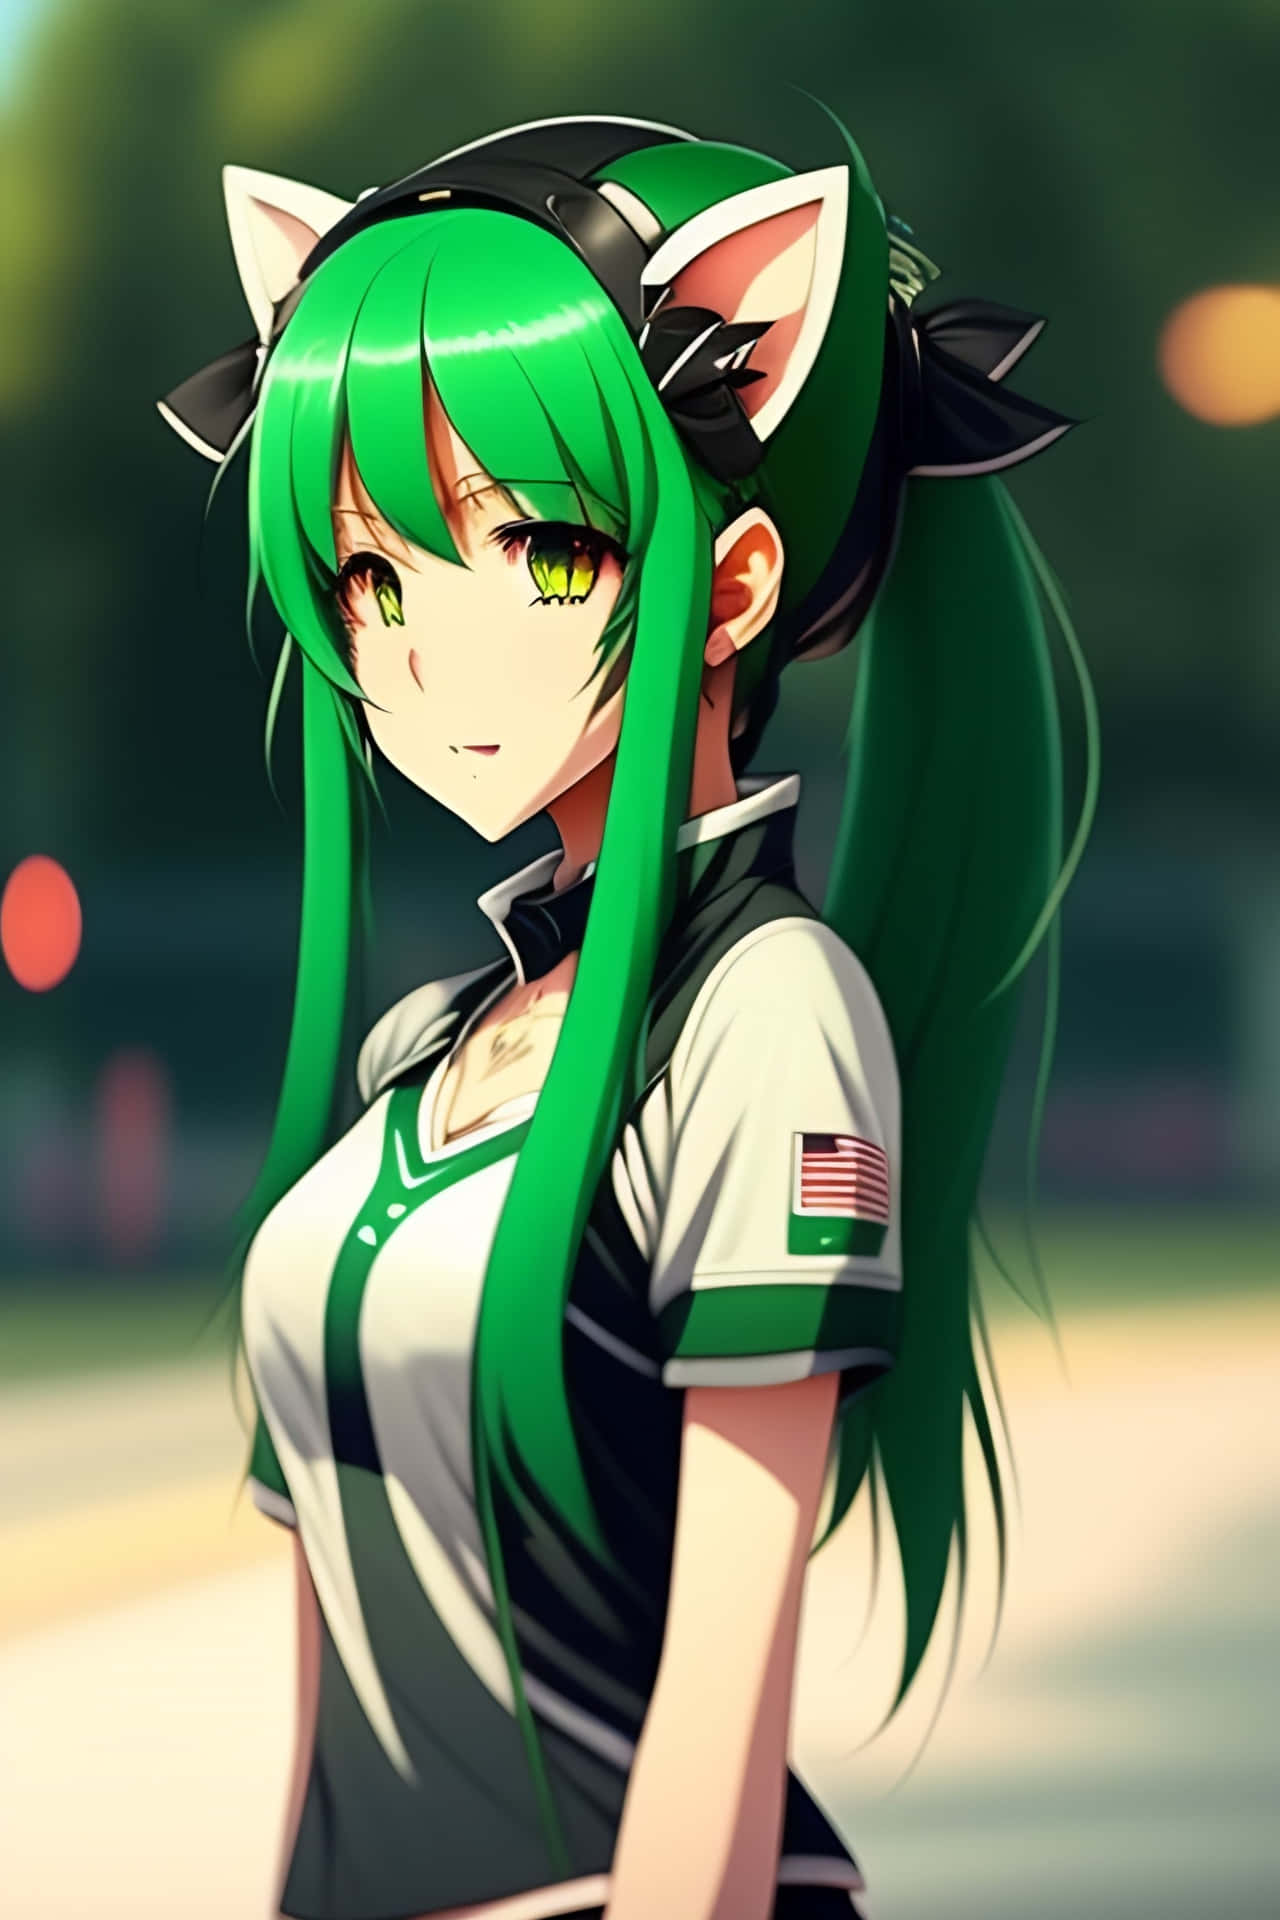 Green Haired Anime Girl With Cat Ears Wallpaper